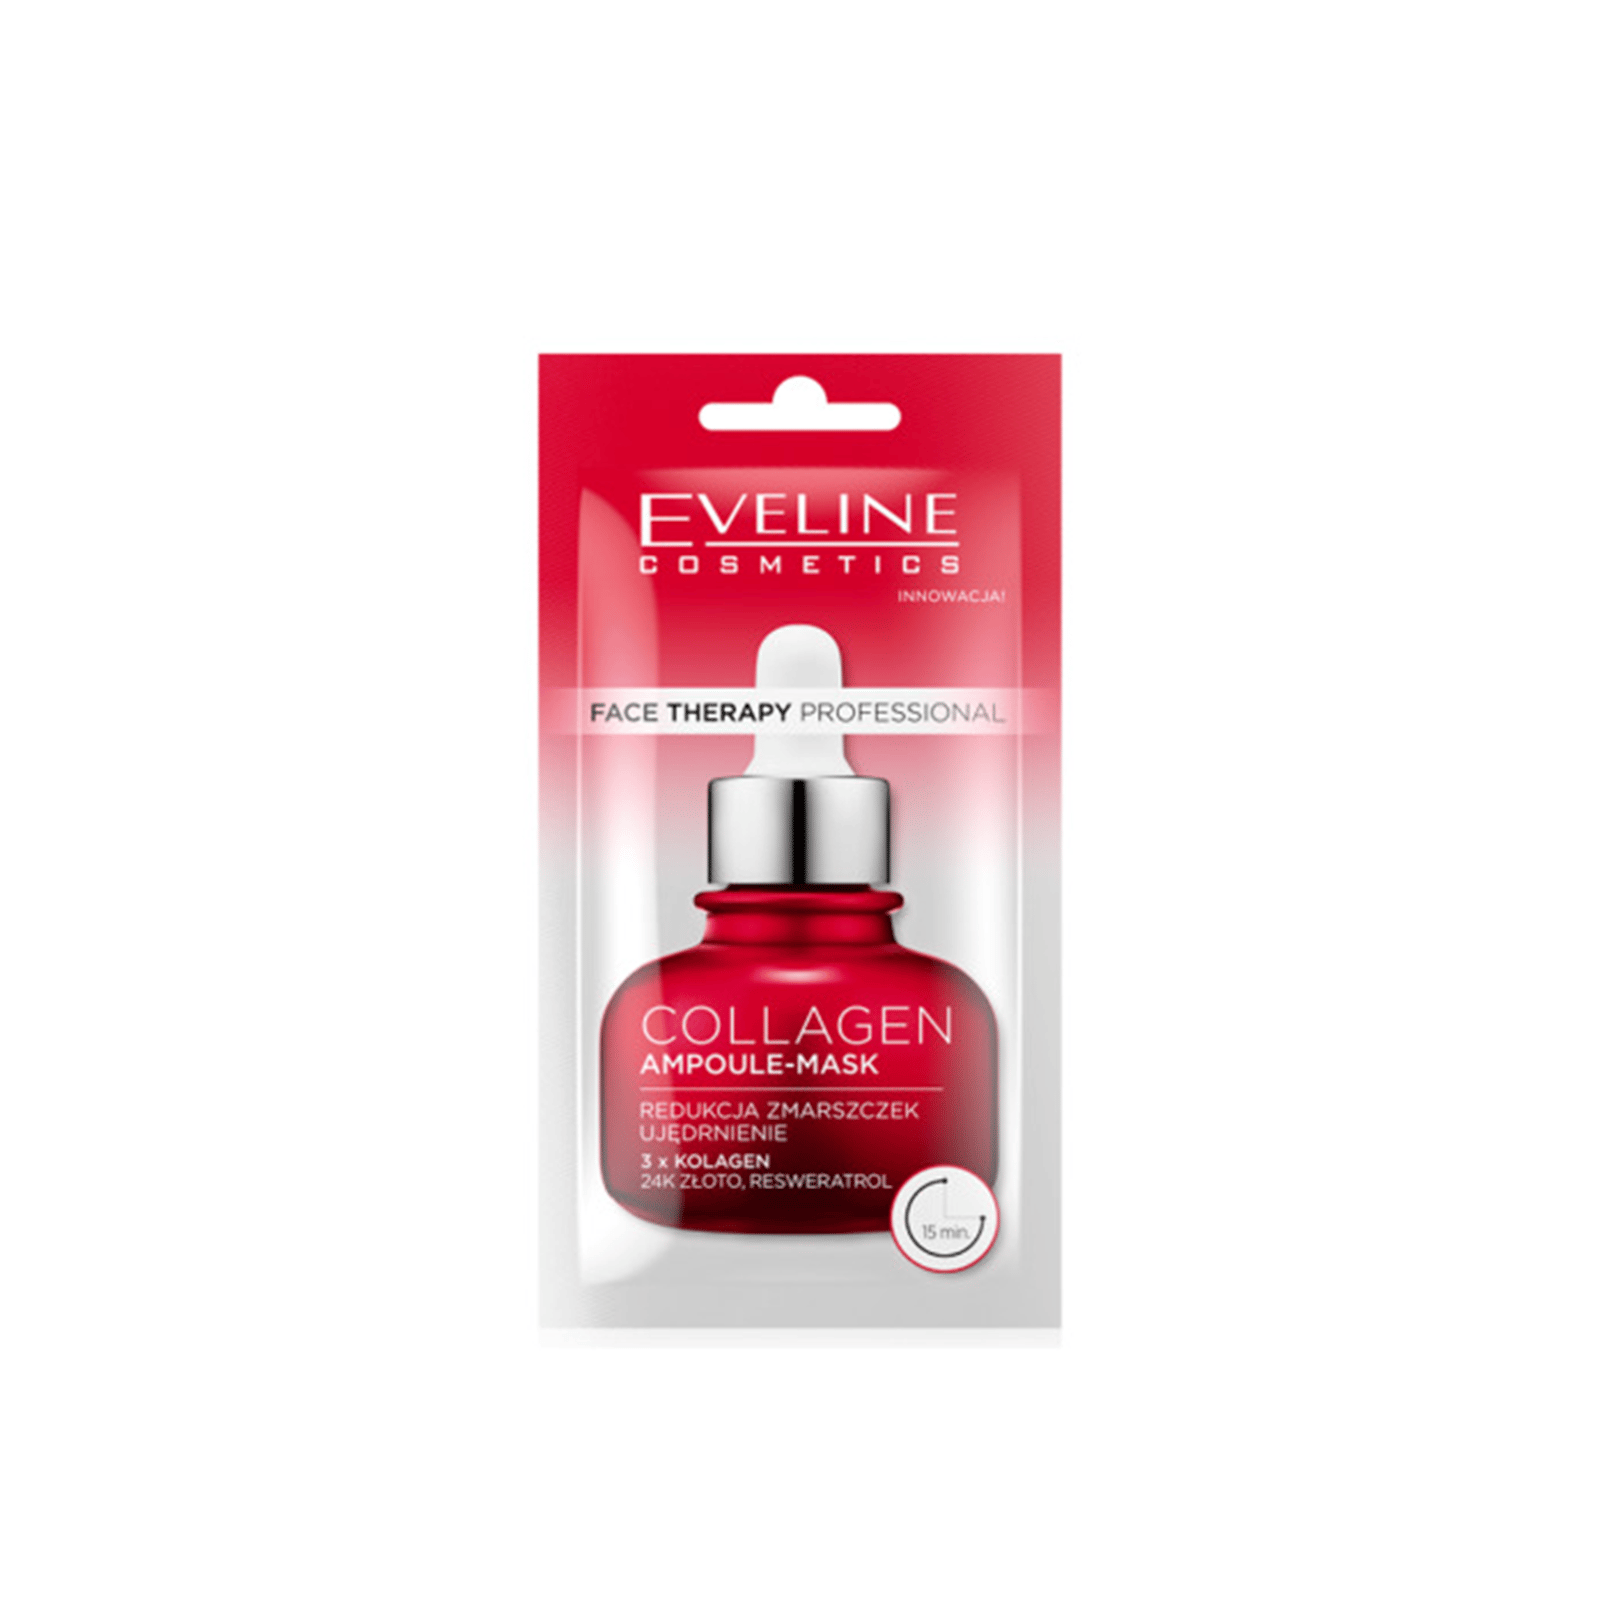 Eveline Cosmetics Face Therapy Collagen Ampoule-Mask 8ml (0.28 fl oz)